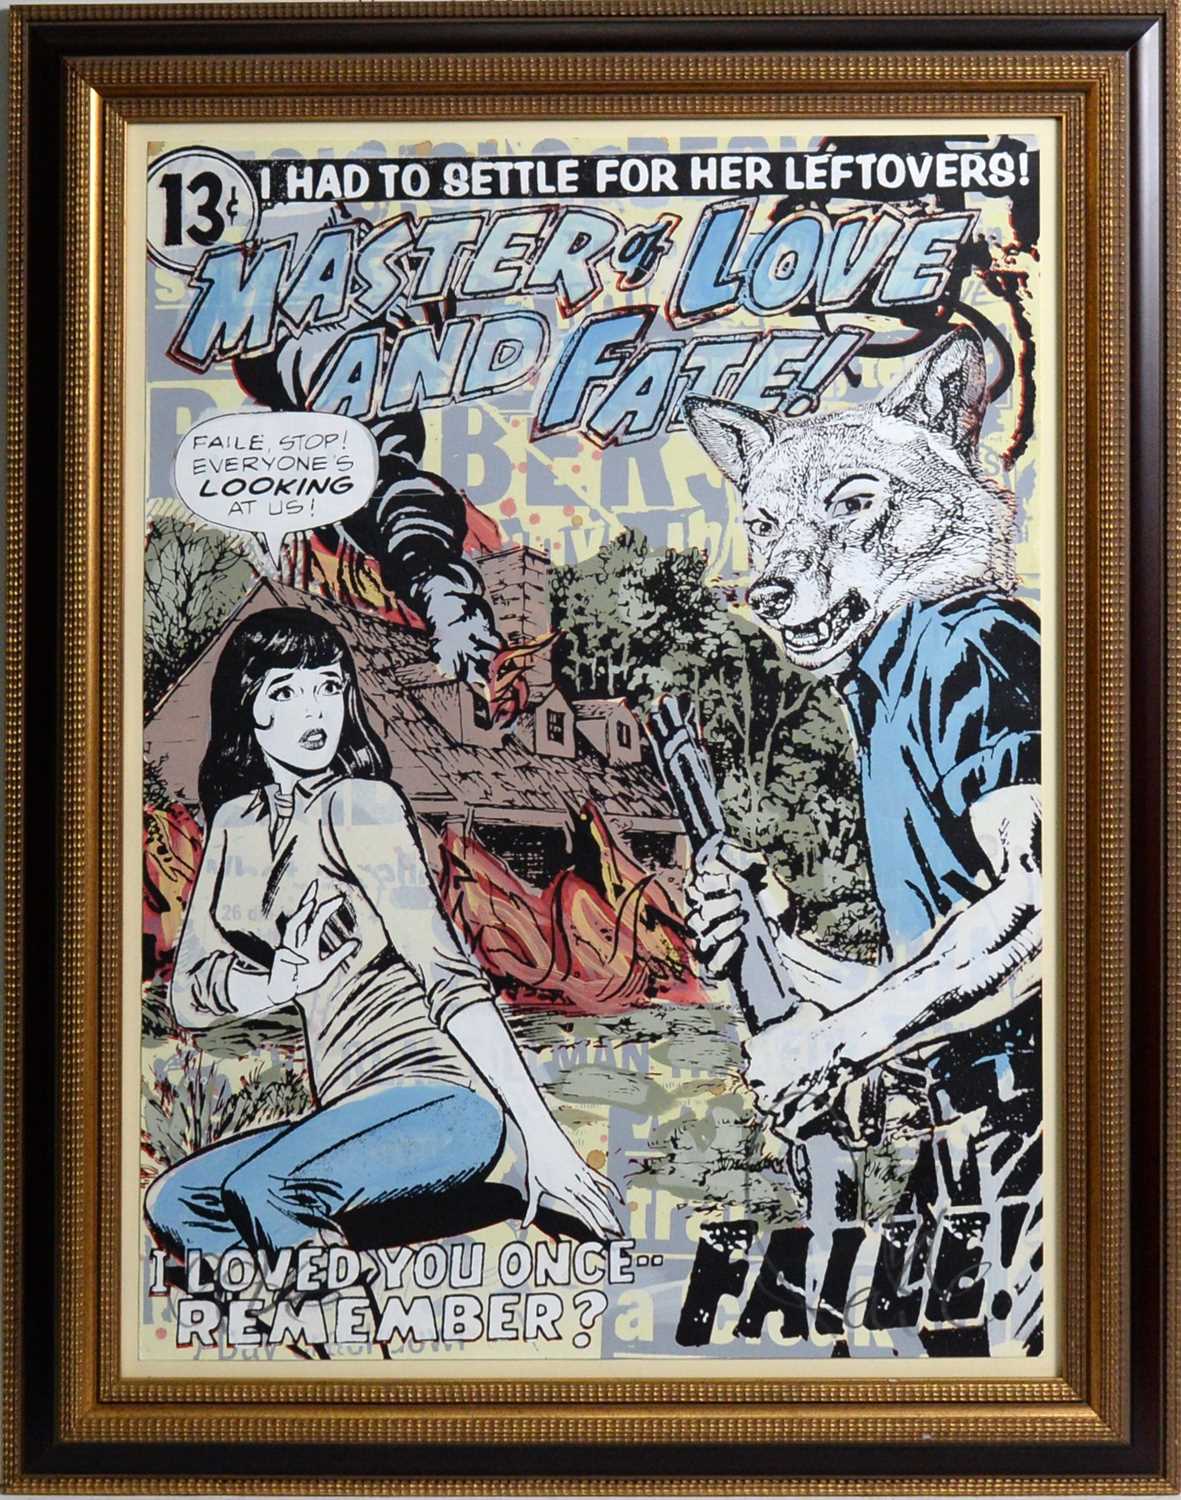 Lot 676 - Faile (Patrick McNeil and Patrick Miller) - Acrylic and silkscreen ink on paper